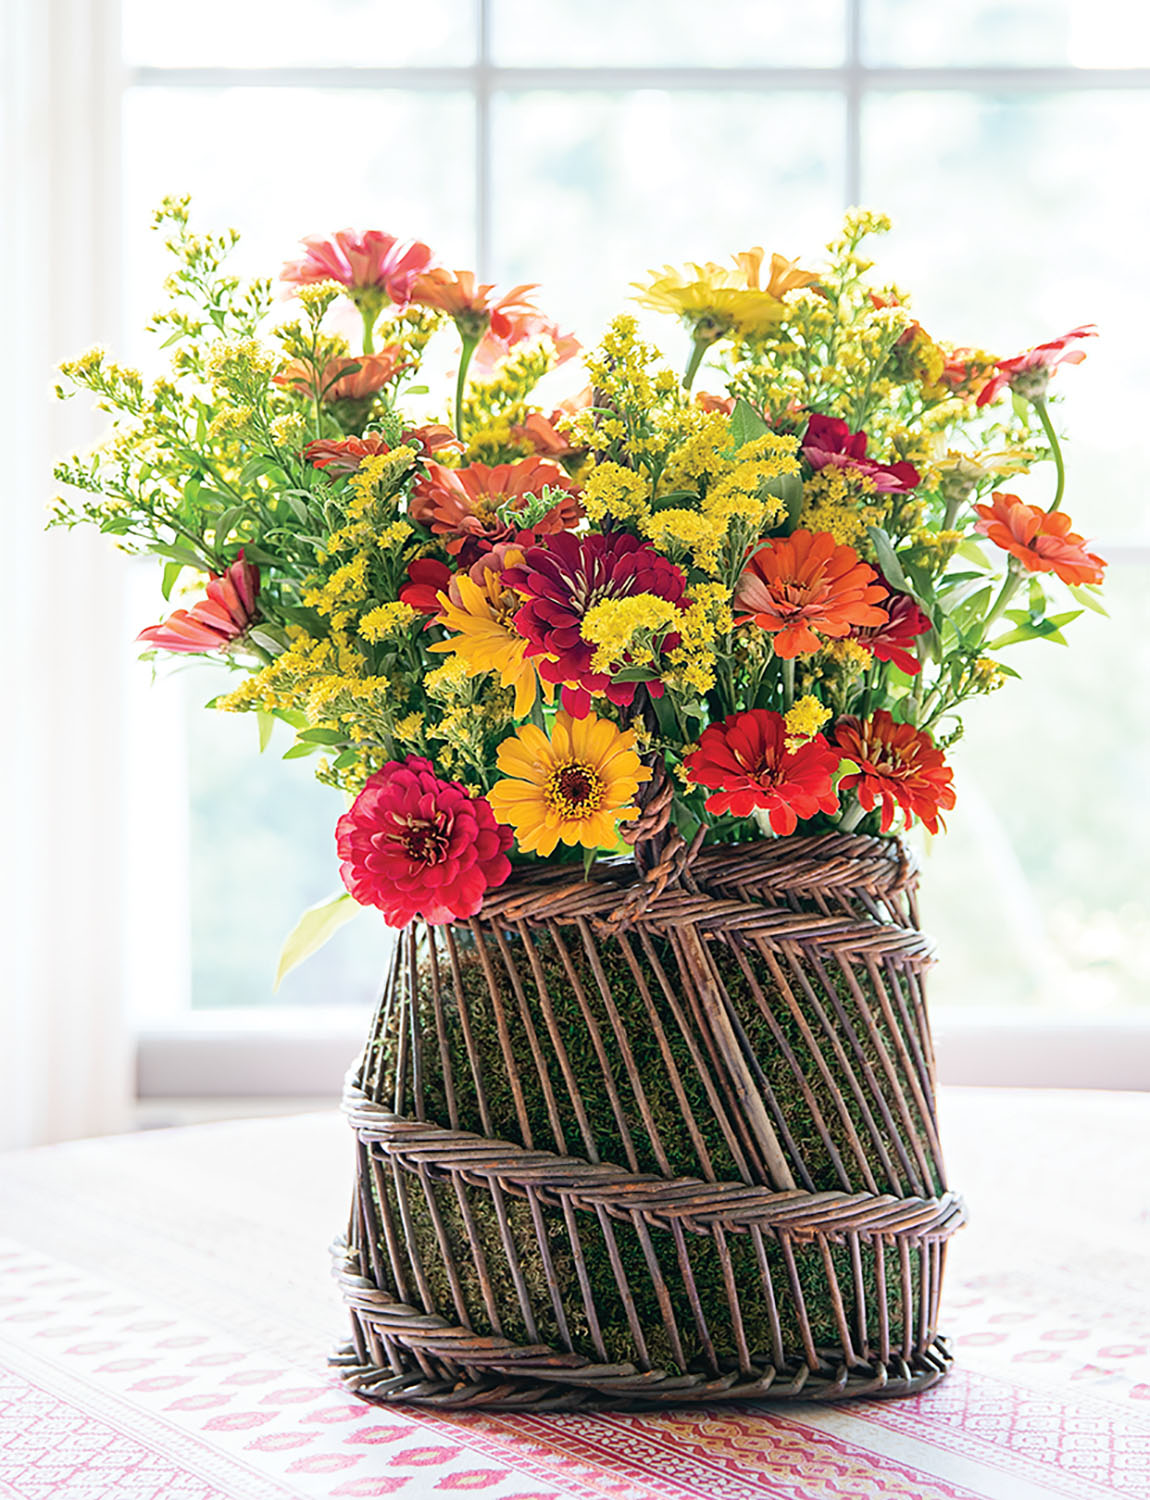 A colorful arrangement in a basket, from the pages of CHARLOTTE MOSS FLOWERS